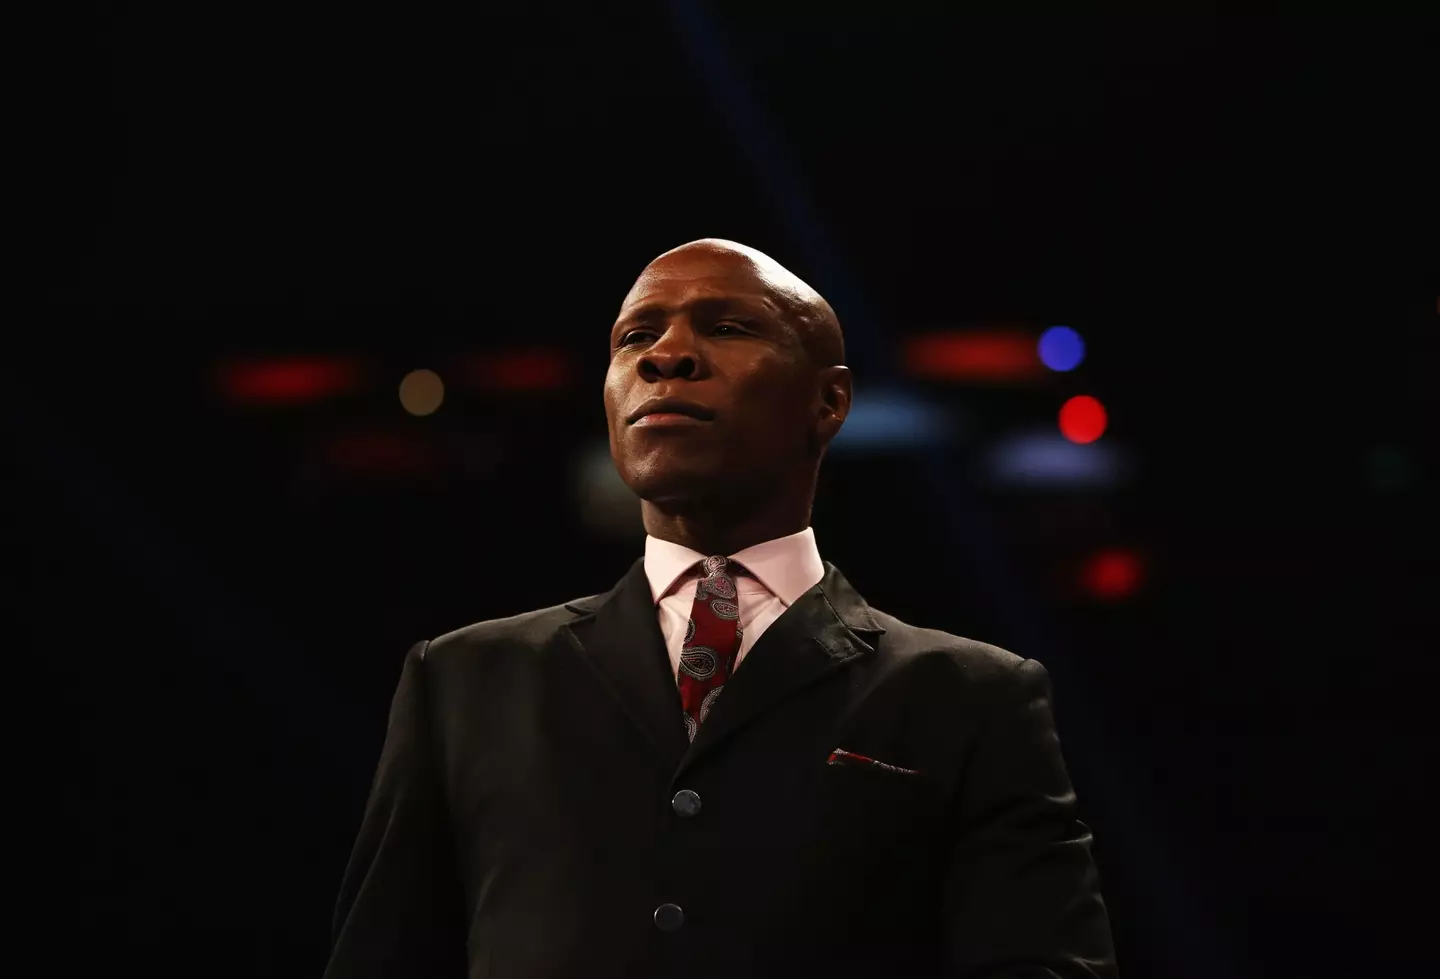 Chris Eubank has spoken about the loss of his brother for the first time.